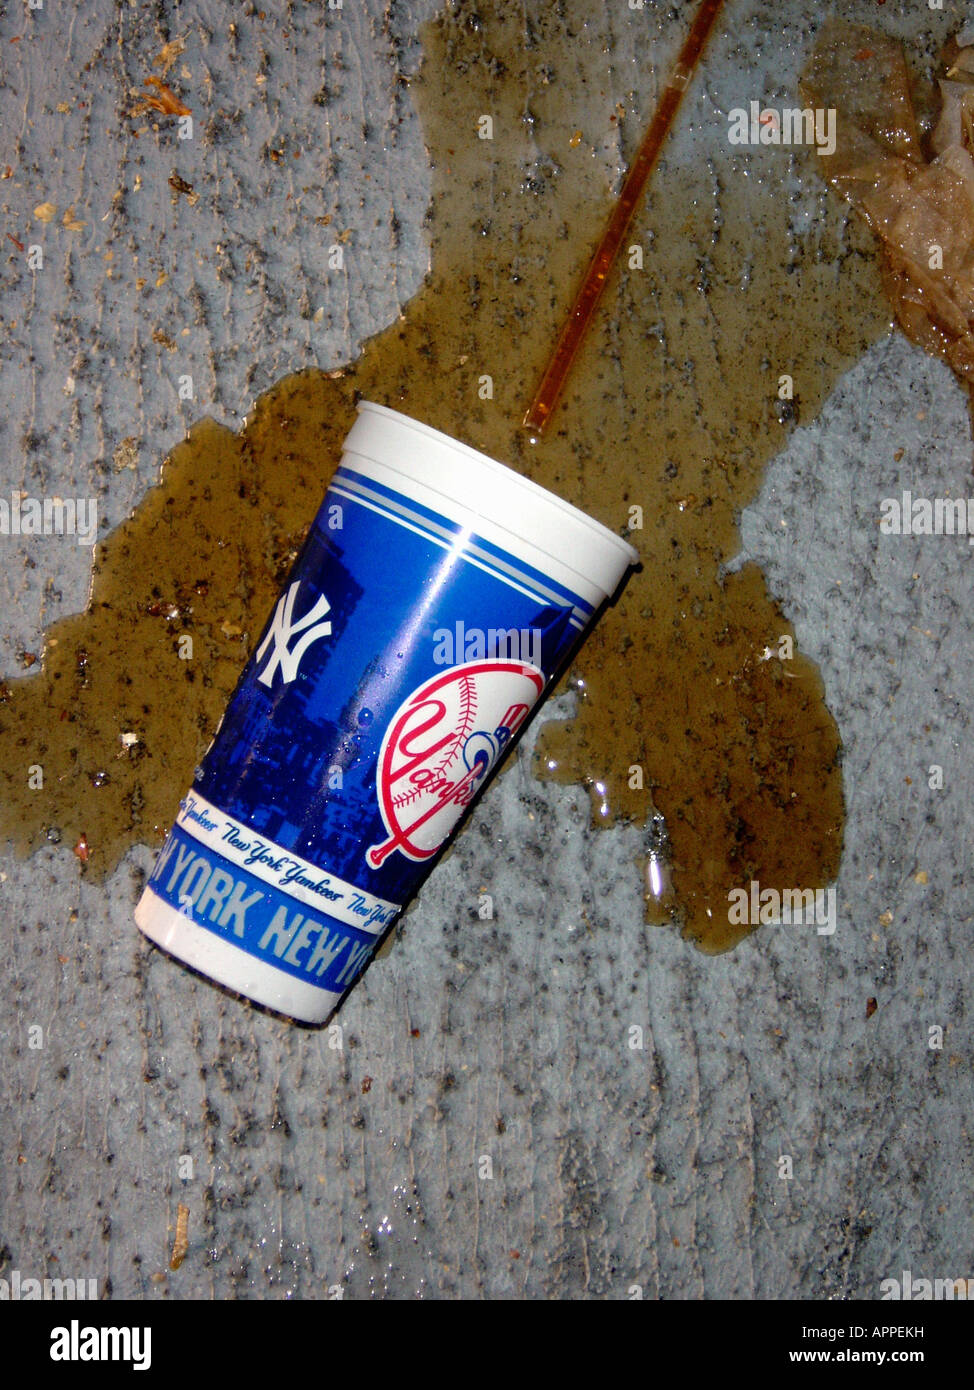 Spilled Plastic Logo Cup of Cola Soda at a Yankees Baseball Game at Yankee Stadium in The Bronx New York City USA Stock Photo